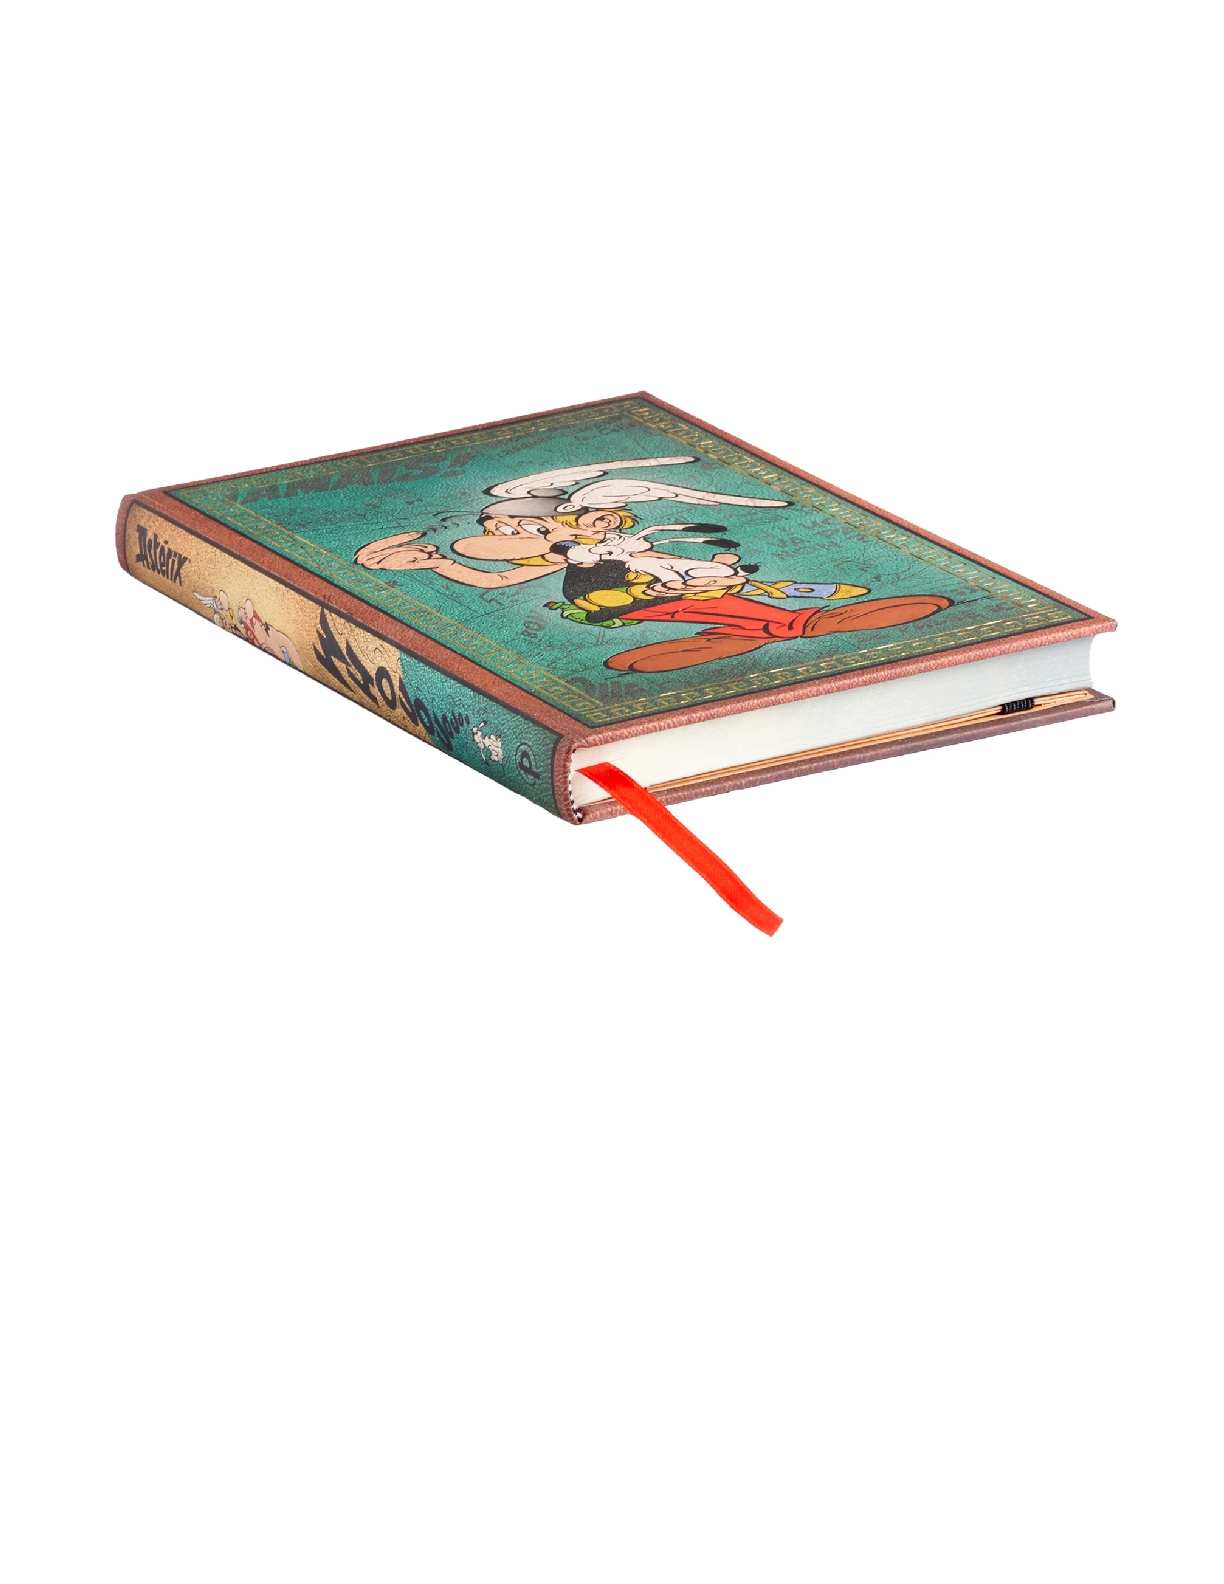 Asterix the Gaul, The Adventures of Asterix, Hardcover Journals, Midi, Lined, Elastic Band, 144 Pg, 120 GSM